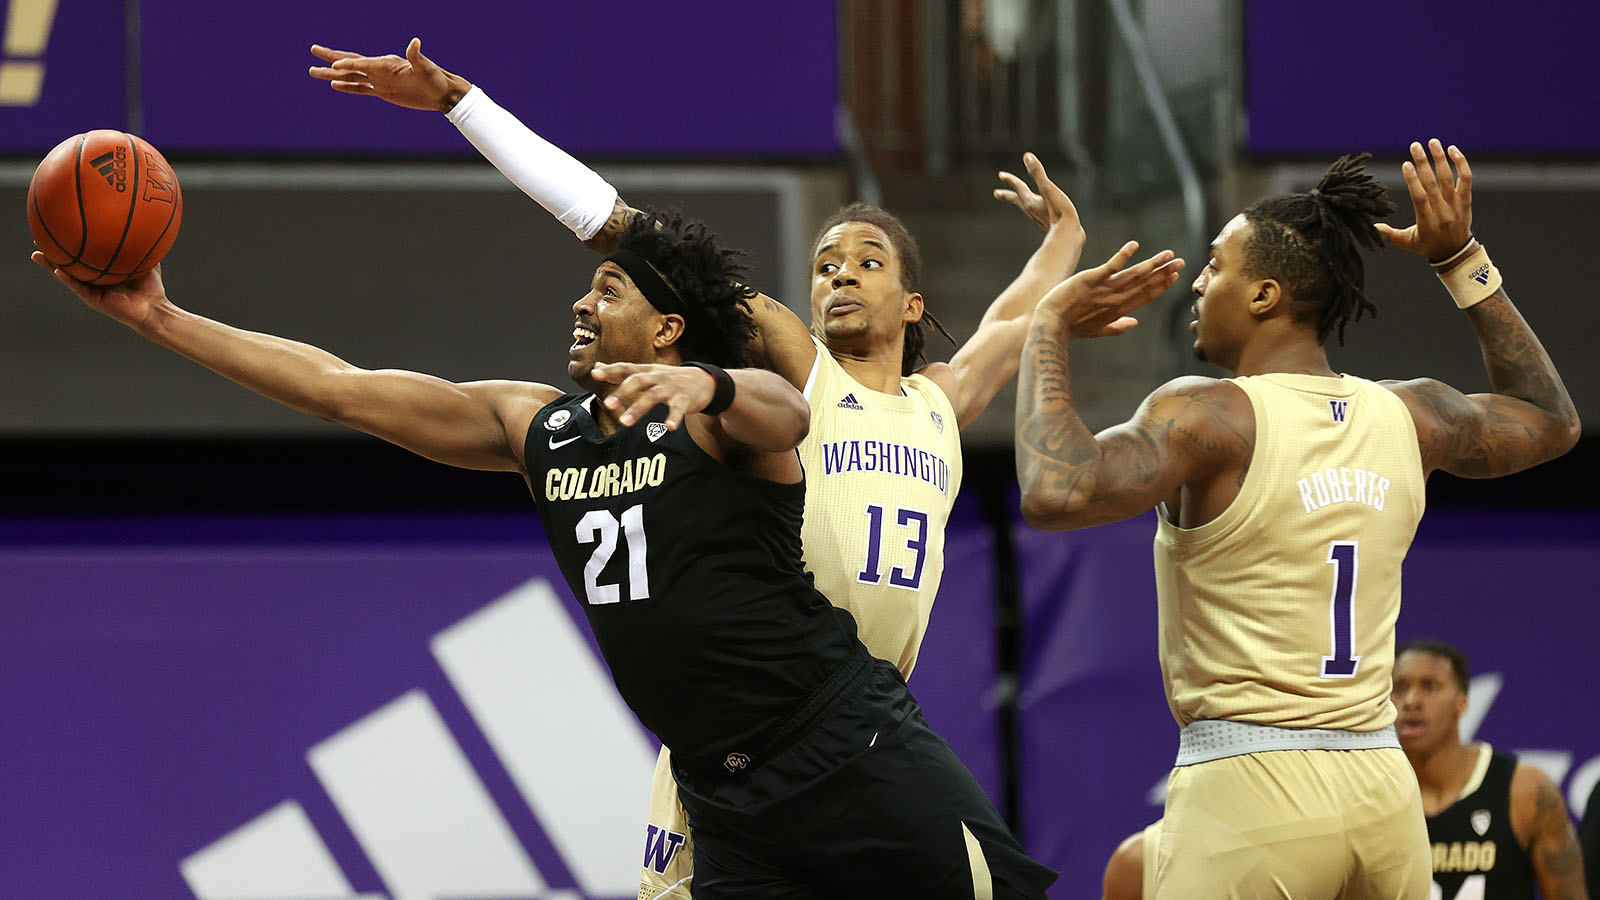 Evan Battey #21 of the Colorado Buffaloes takes a shot against Hameir Wright #13 and Nate Roberts #1 of the Washington Huskies at Alaska Airlines Arena on January 20, 2021.